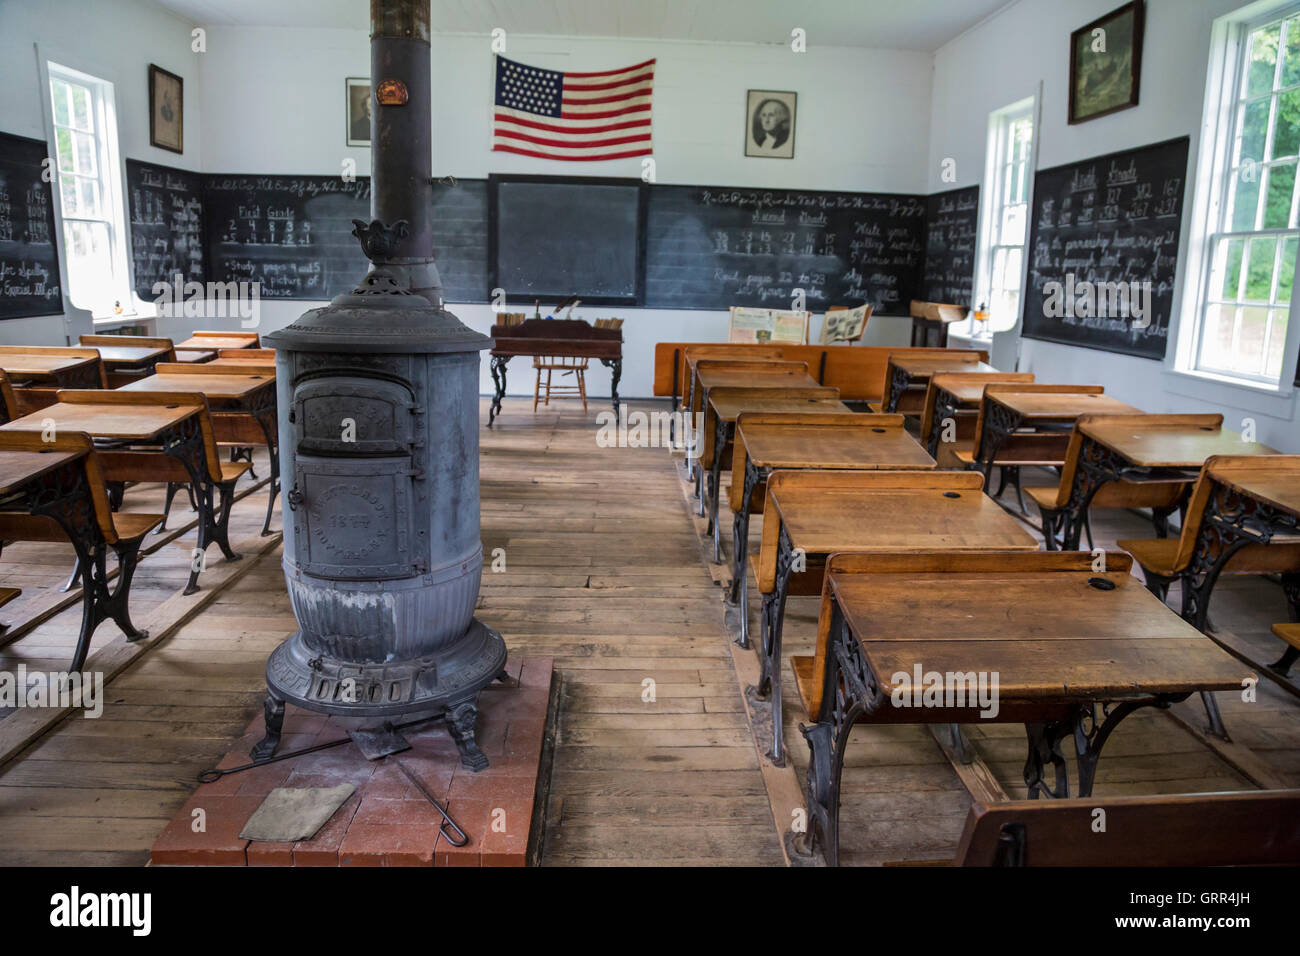 Hastings, Michigan - The Lee School, a one-room schoolhouse in Historic Charlton Park village. Stock Photo